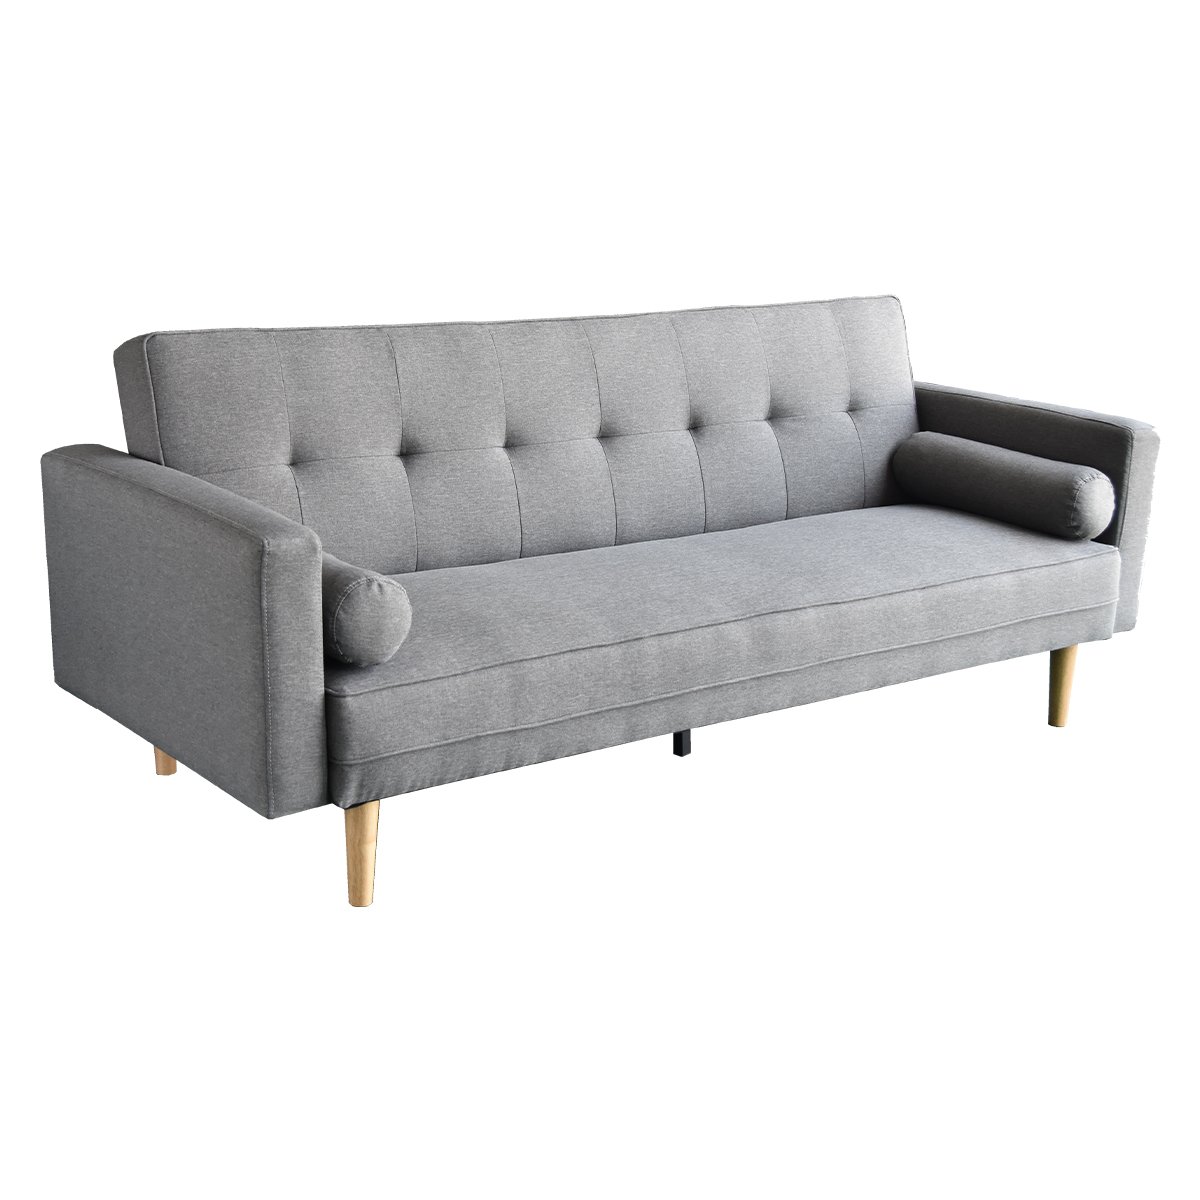 Sarantino 3 Seater Linen Sofa Bed Couch with Pillows - Light Grey 2